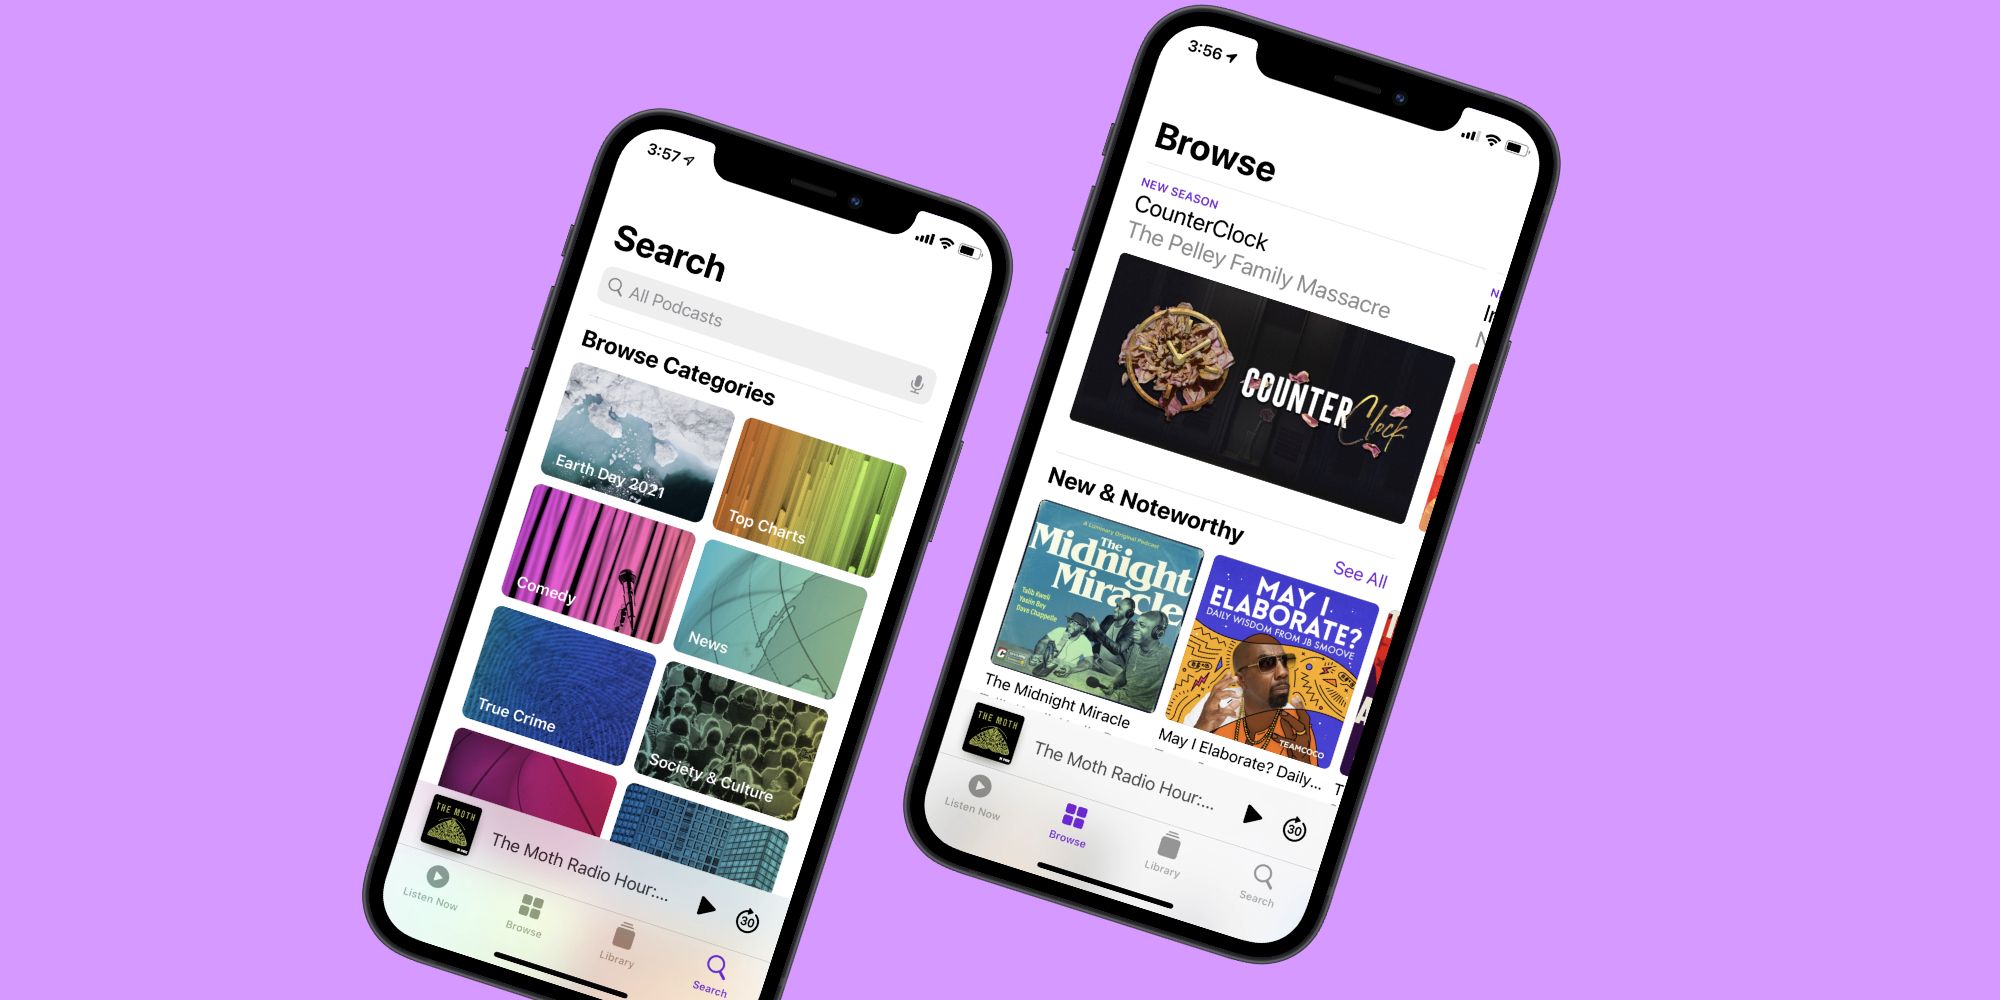 Apple Podcasts app in iOS 14.5